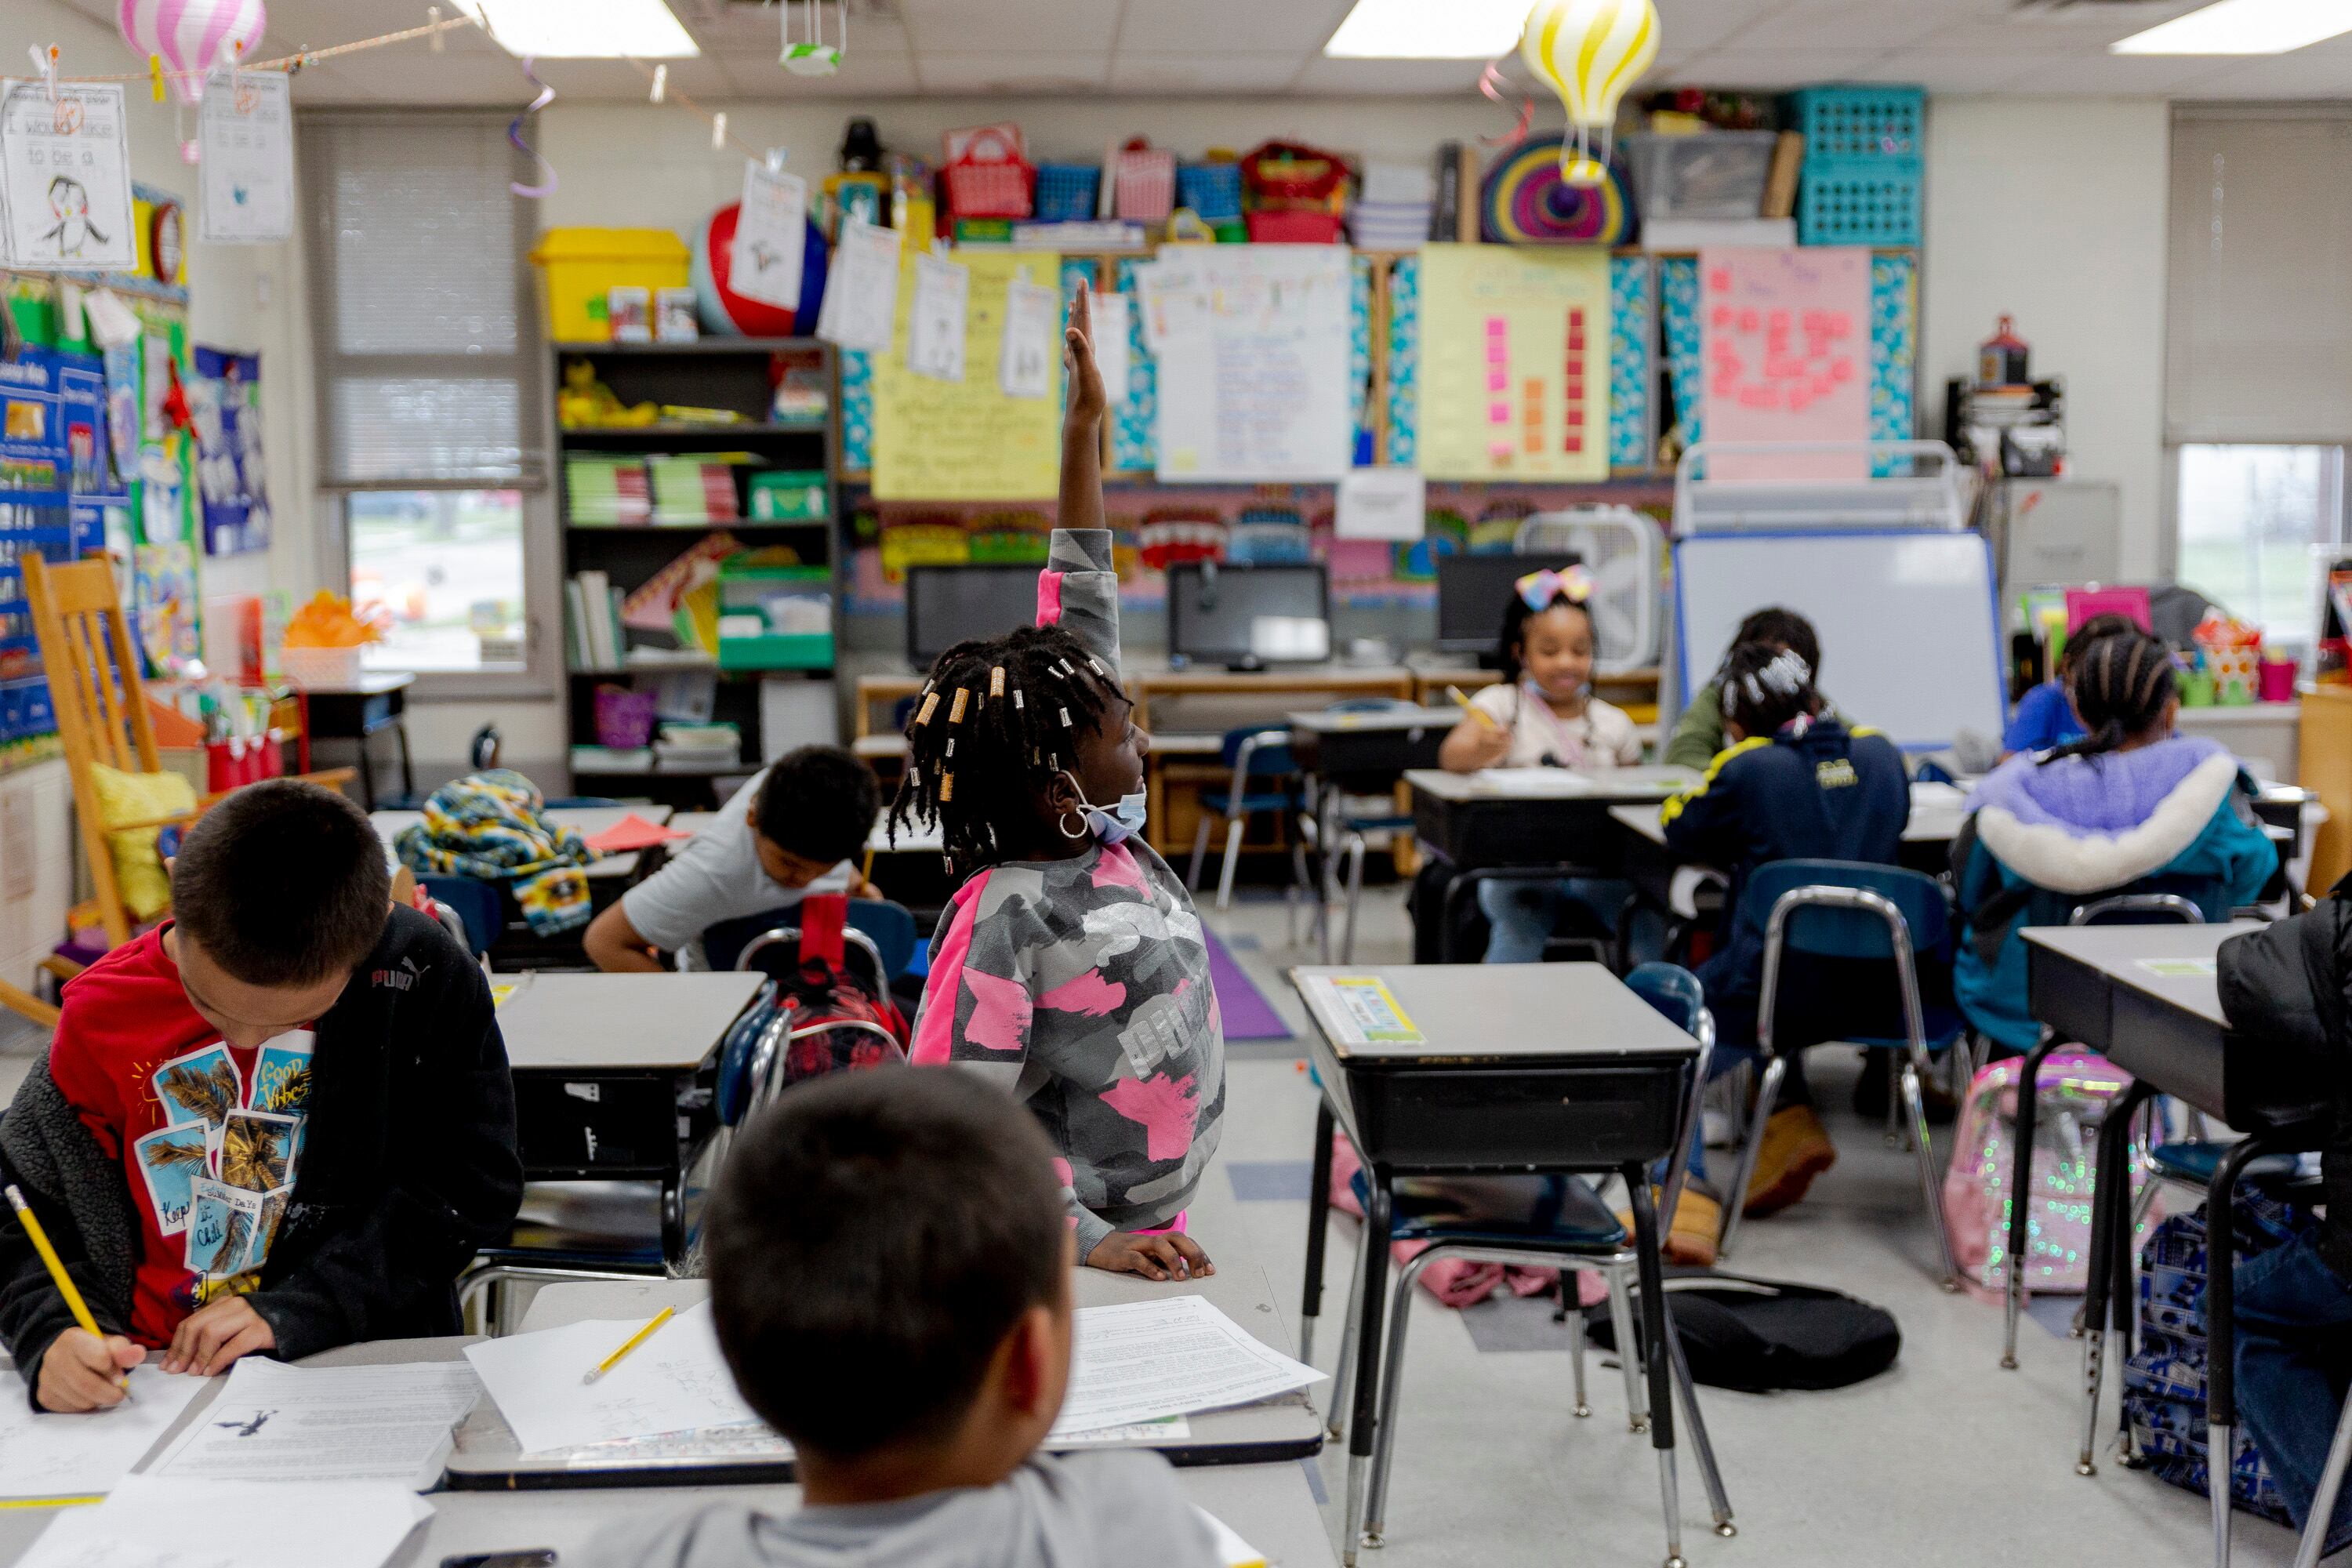 A student raises her hand and stands at her desk, as several other young students work around her in the classroom.